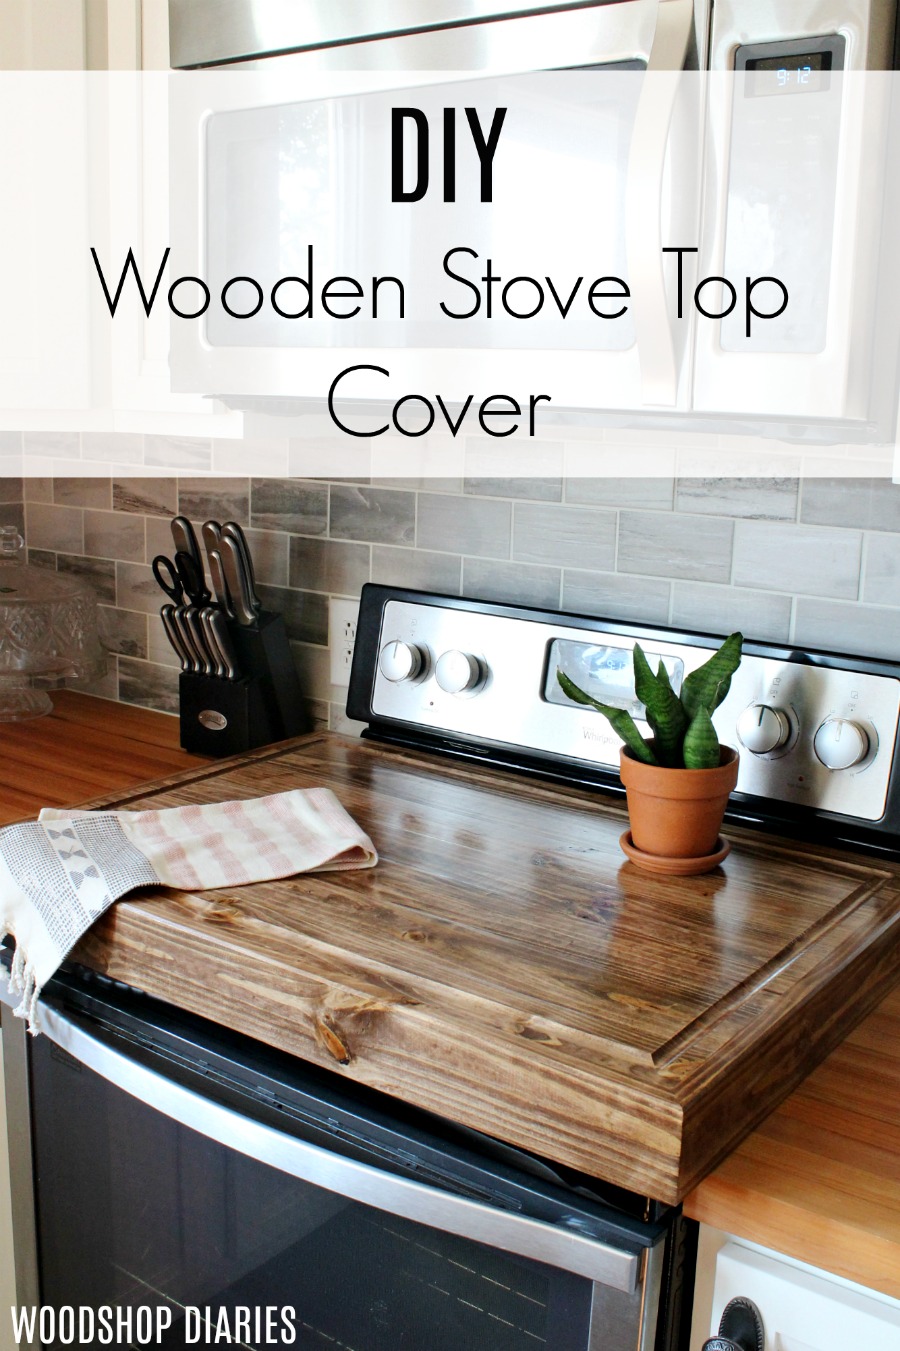 How to maximize your counter space by building a DIY wooden stove top cover